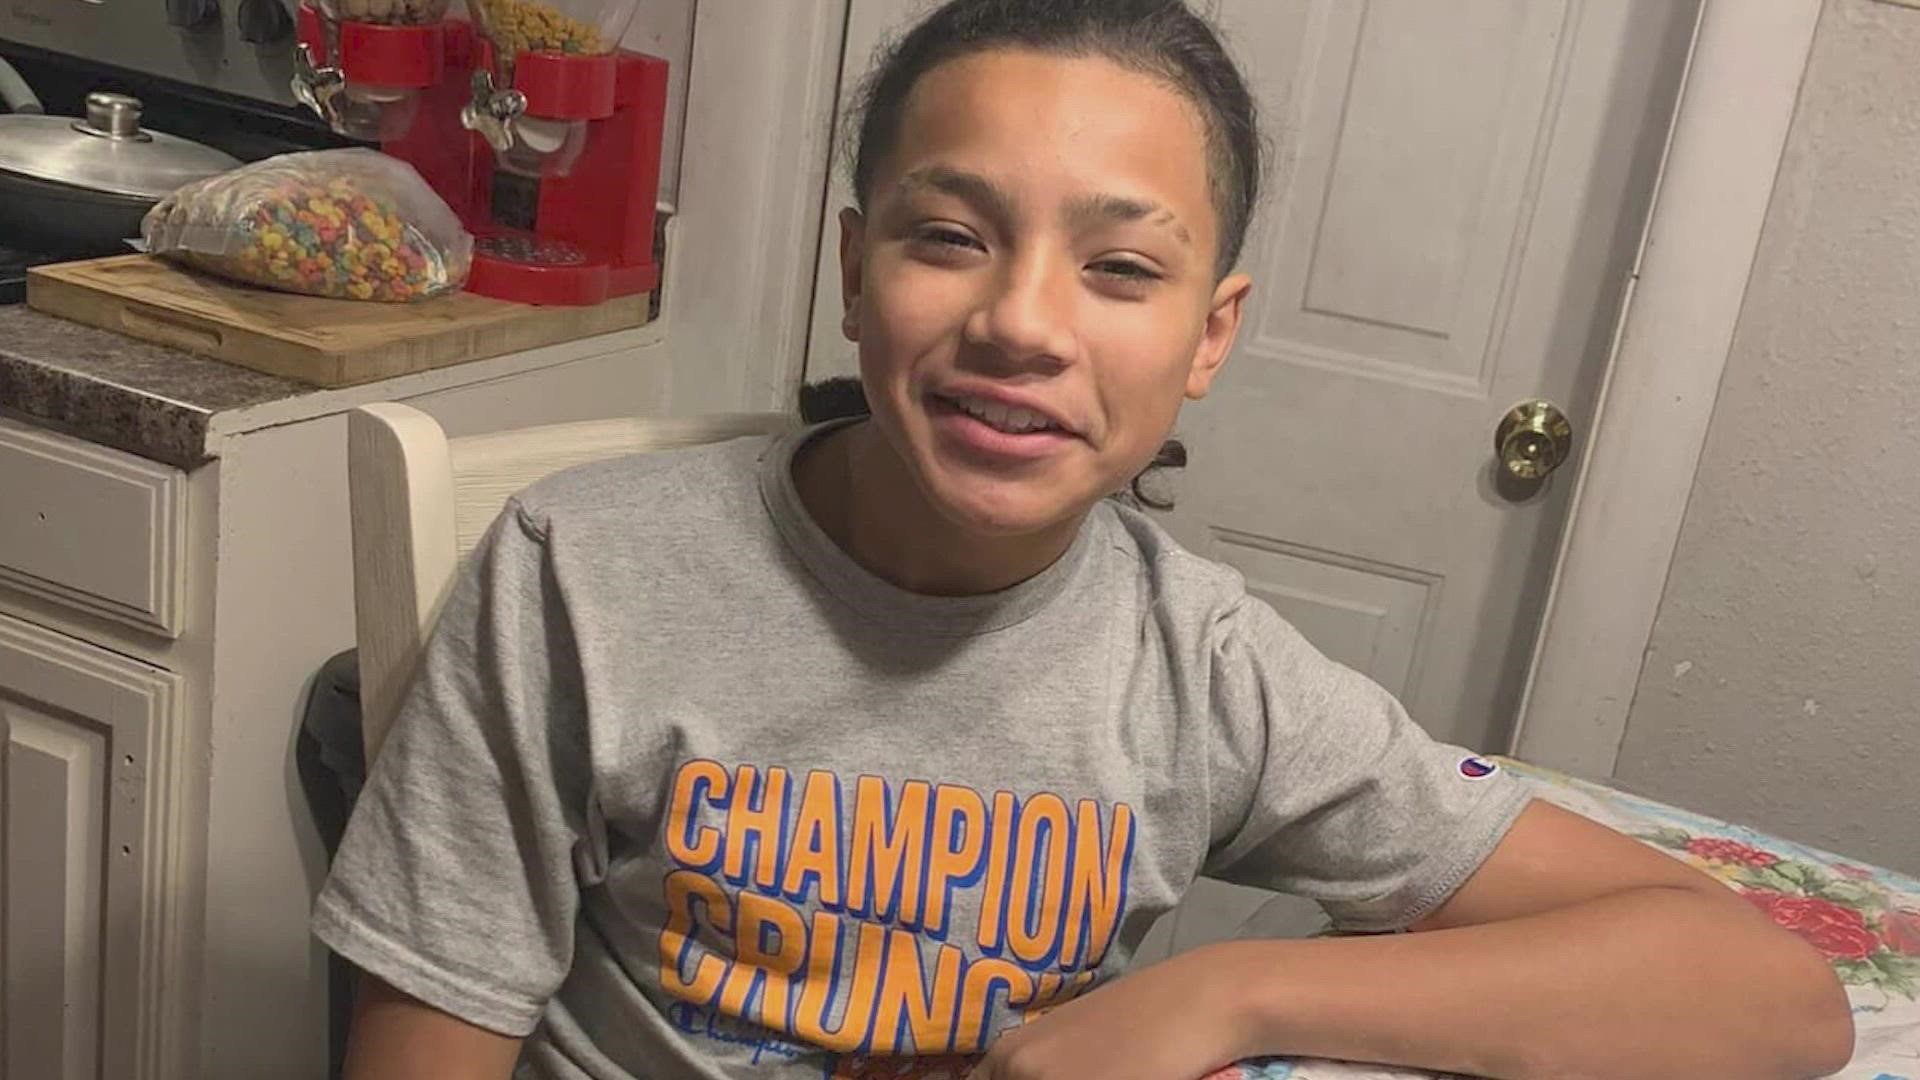 The mother has identified the boy as AJ Hernandez. Police said an officer opened fire after the boy backed a stolen vehicle into a police cruiser.